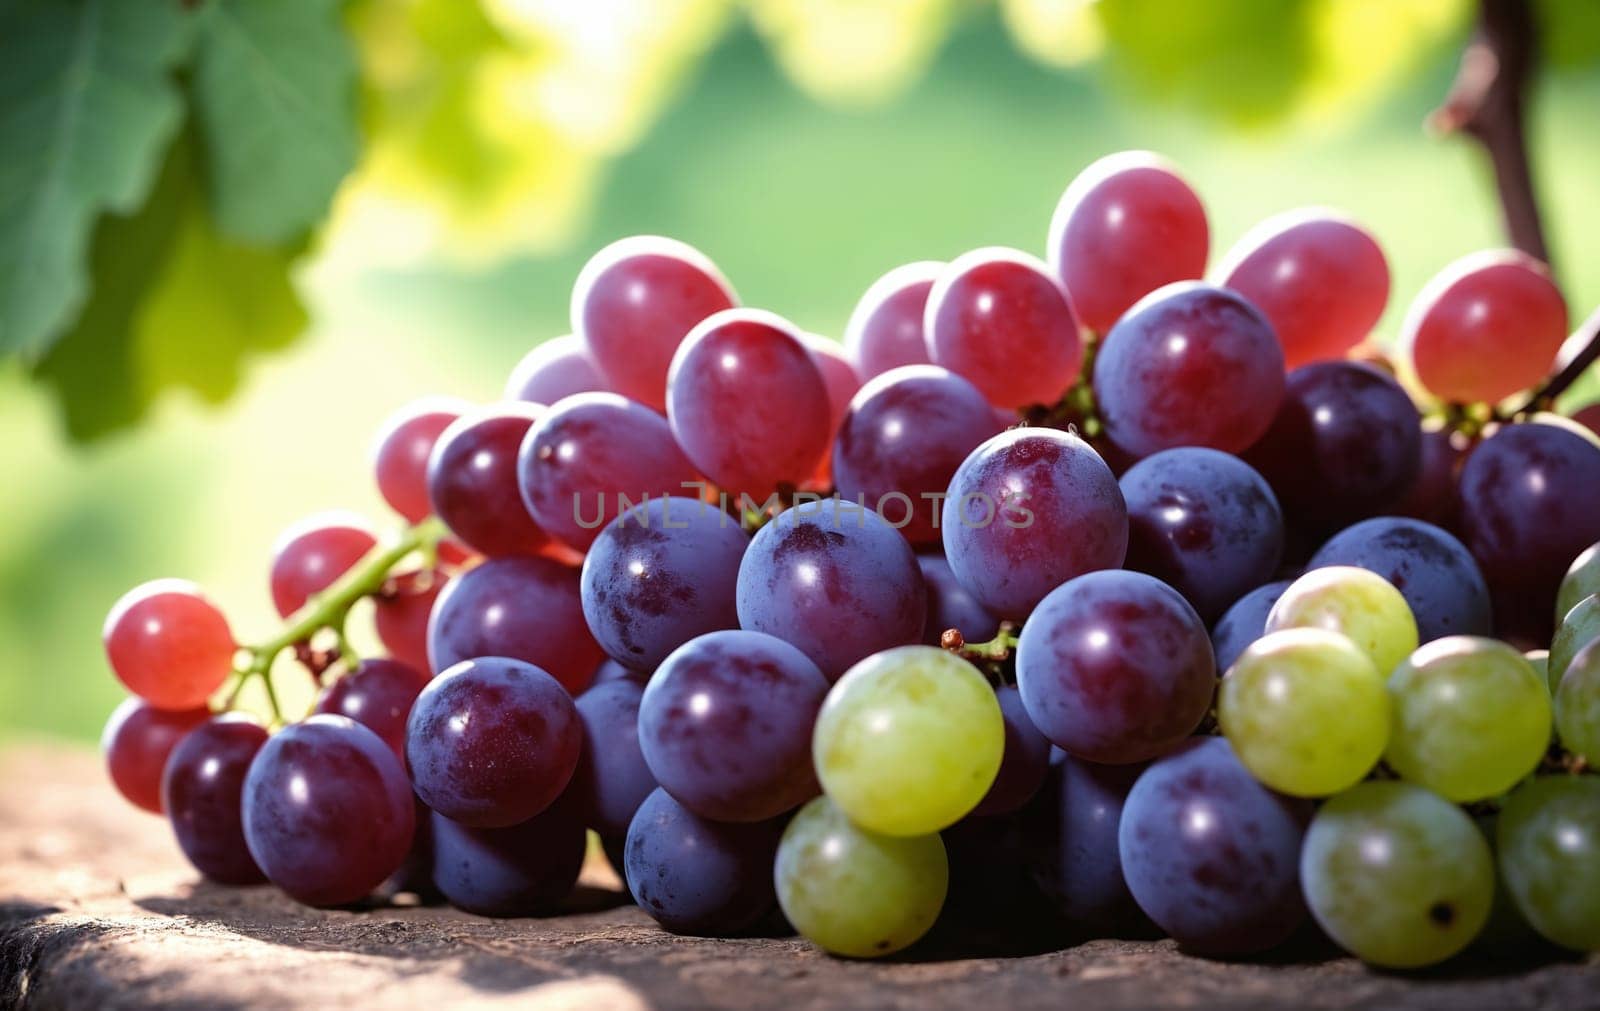 Bunch of grapes in vineyard, close-up. Nature background.